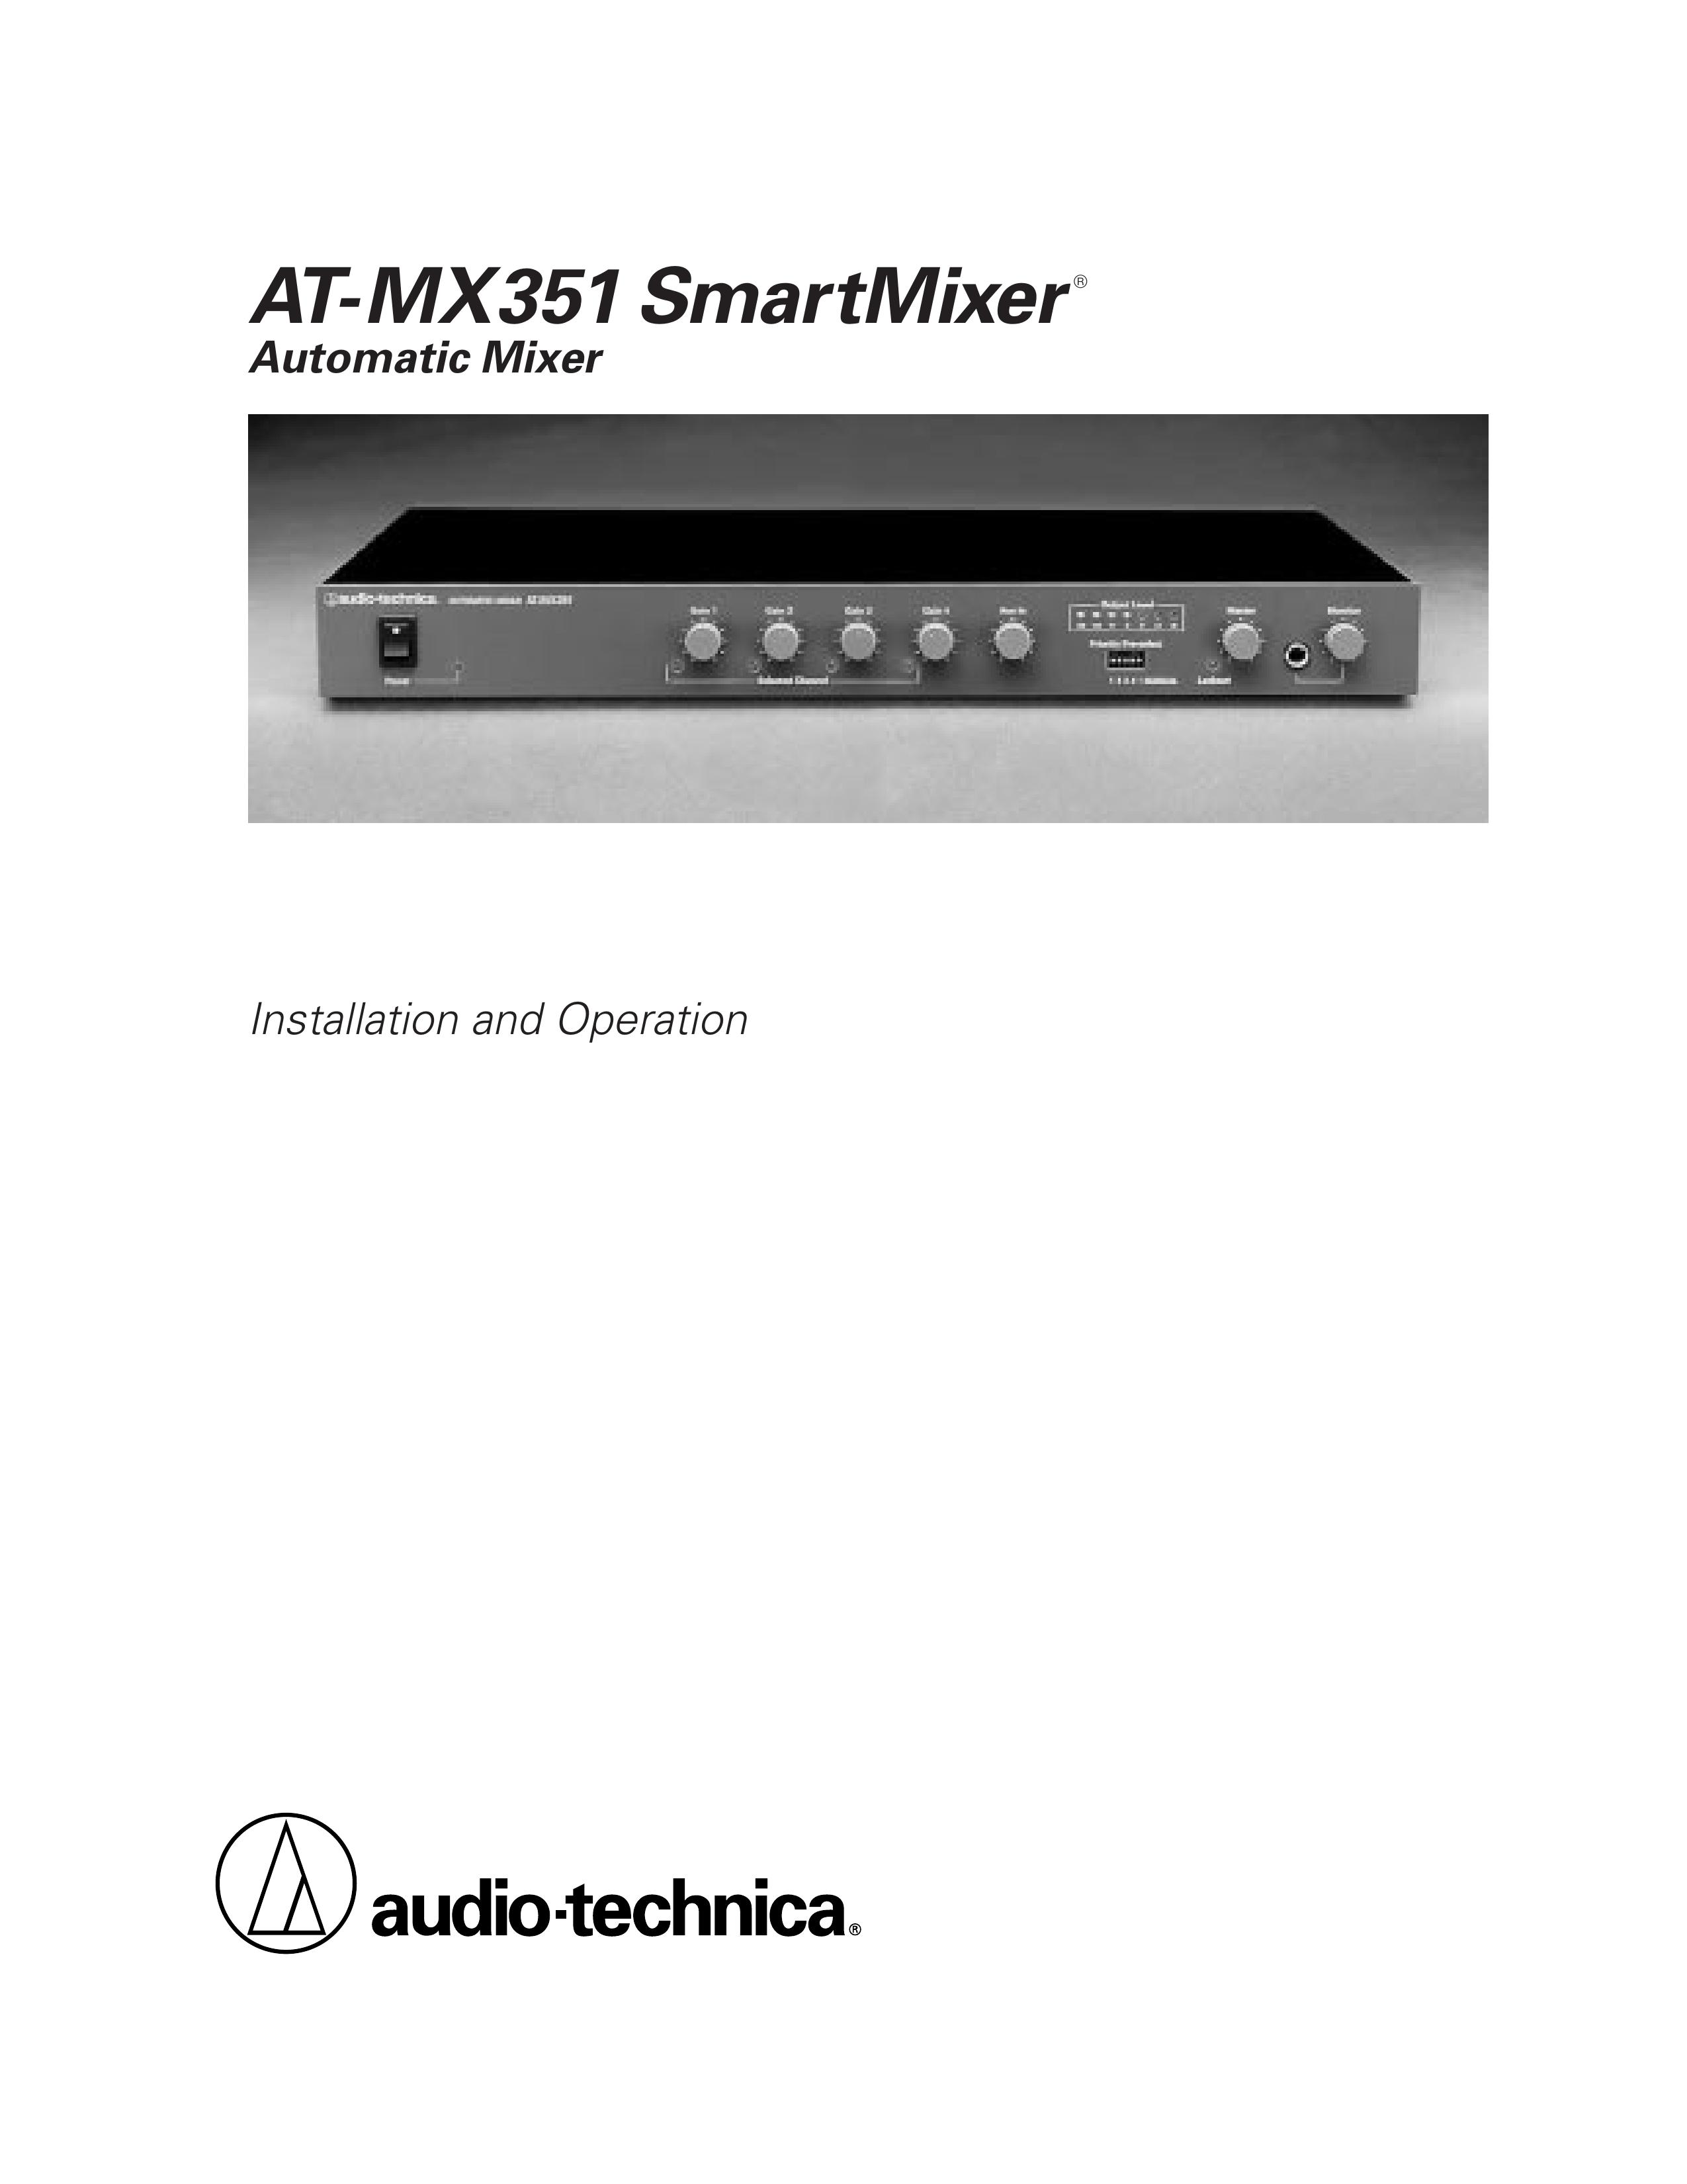 Audio-Technica AT-MX351 Musical Instrument User Manual